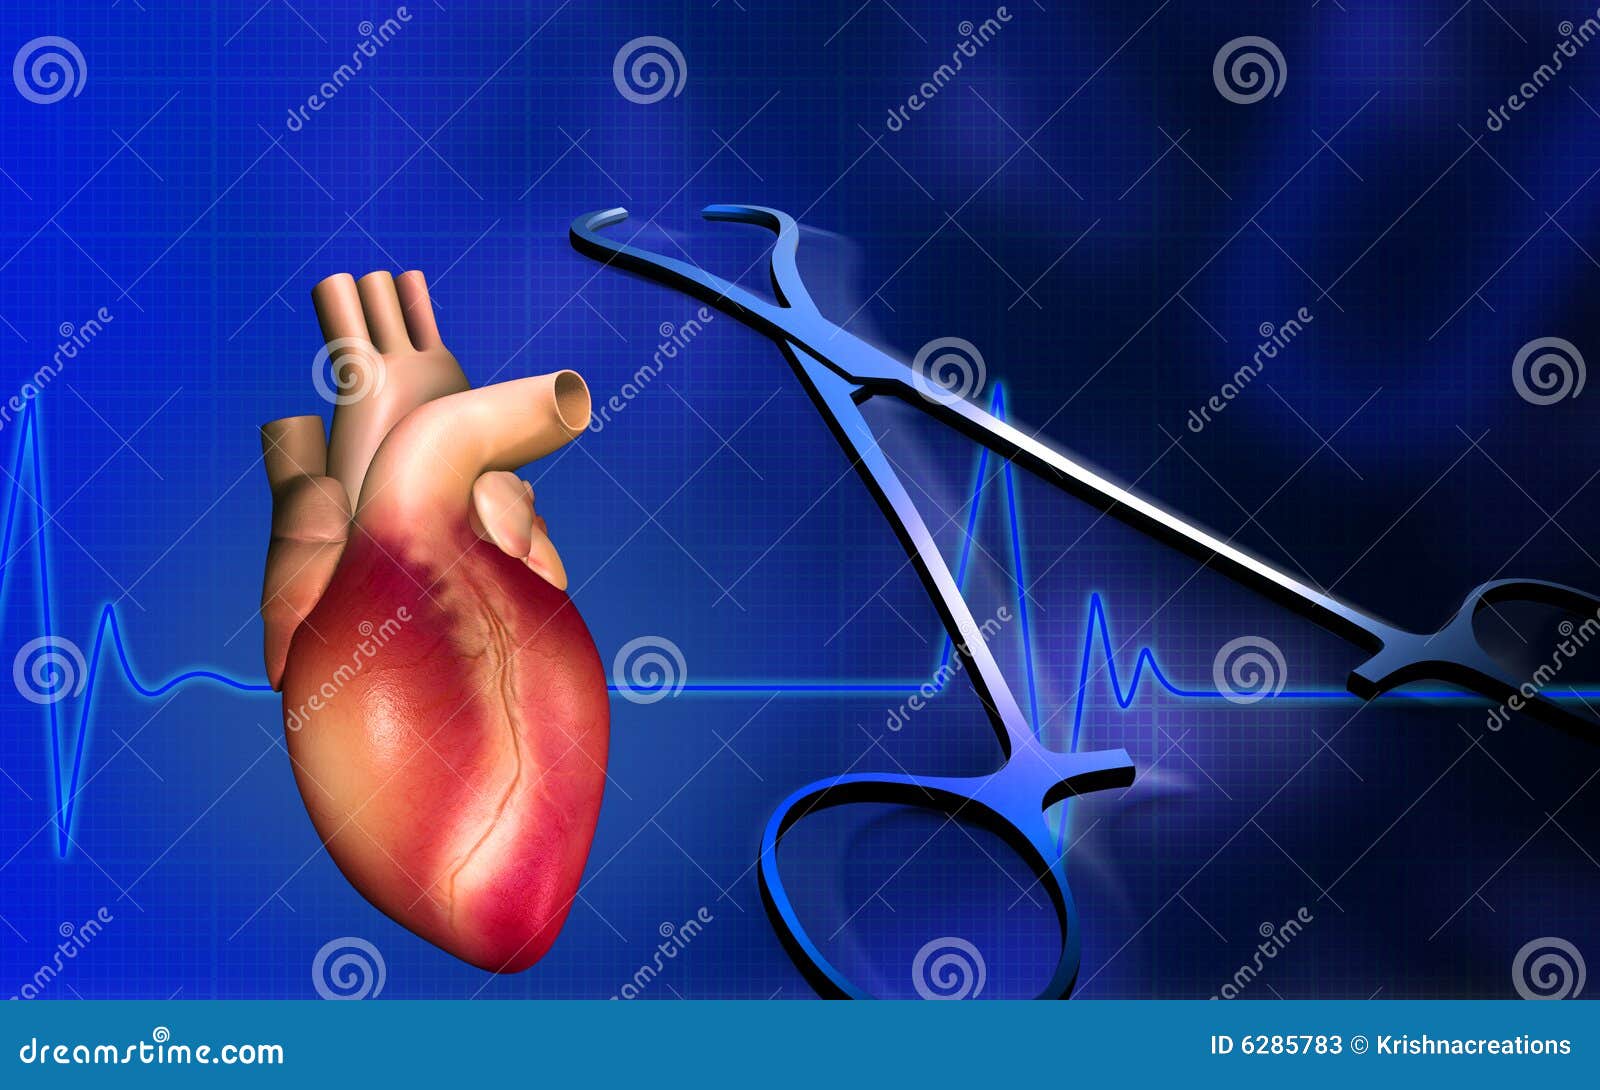 heart with eco cardio gram pulse and surgical scis